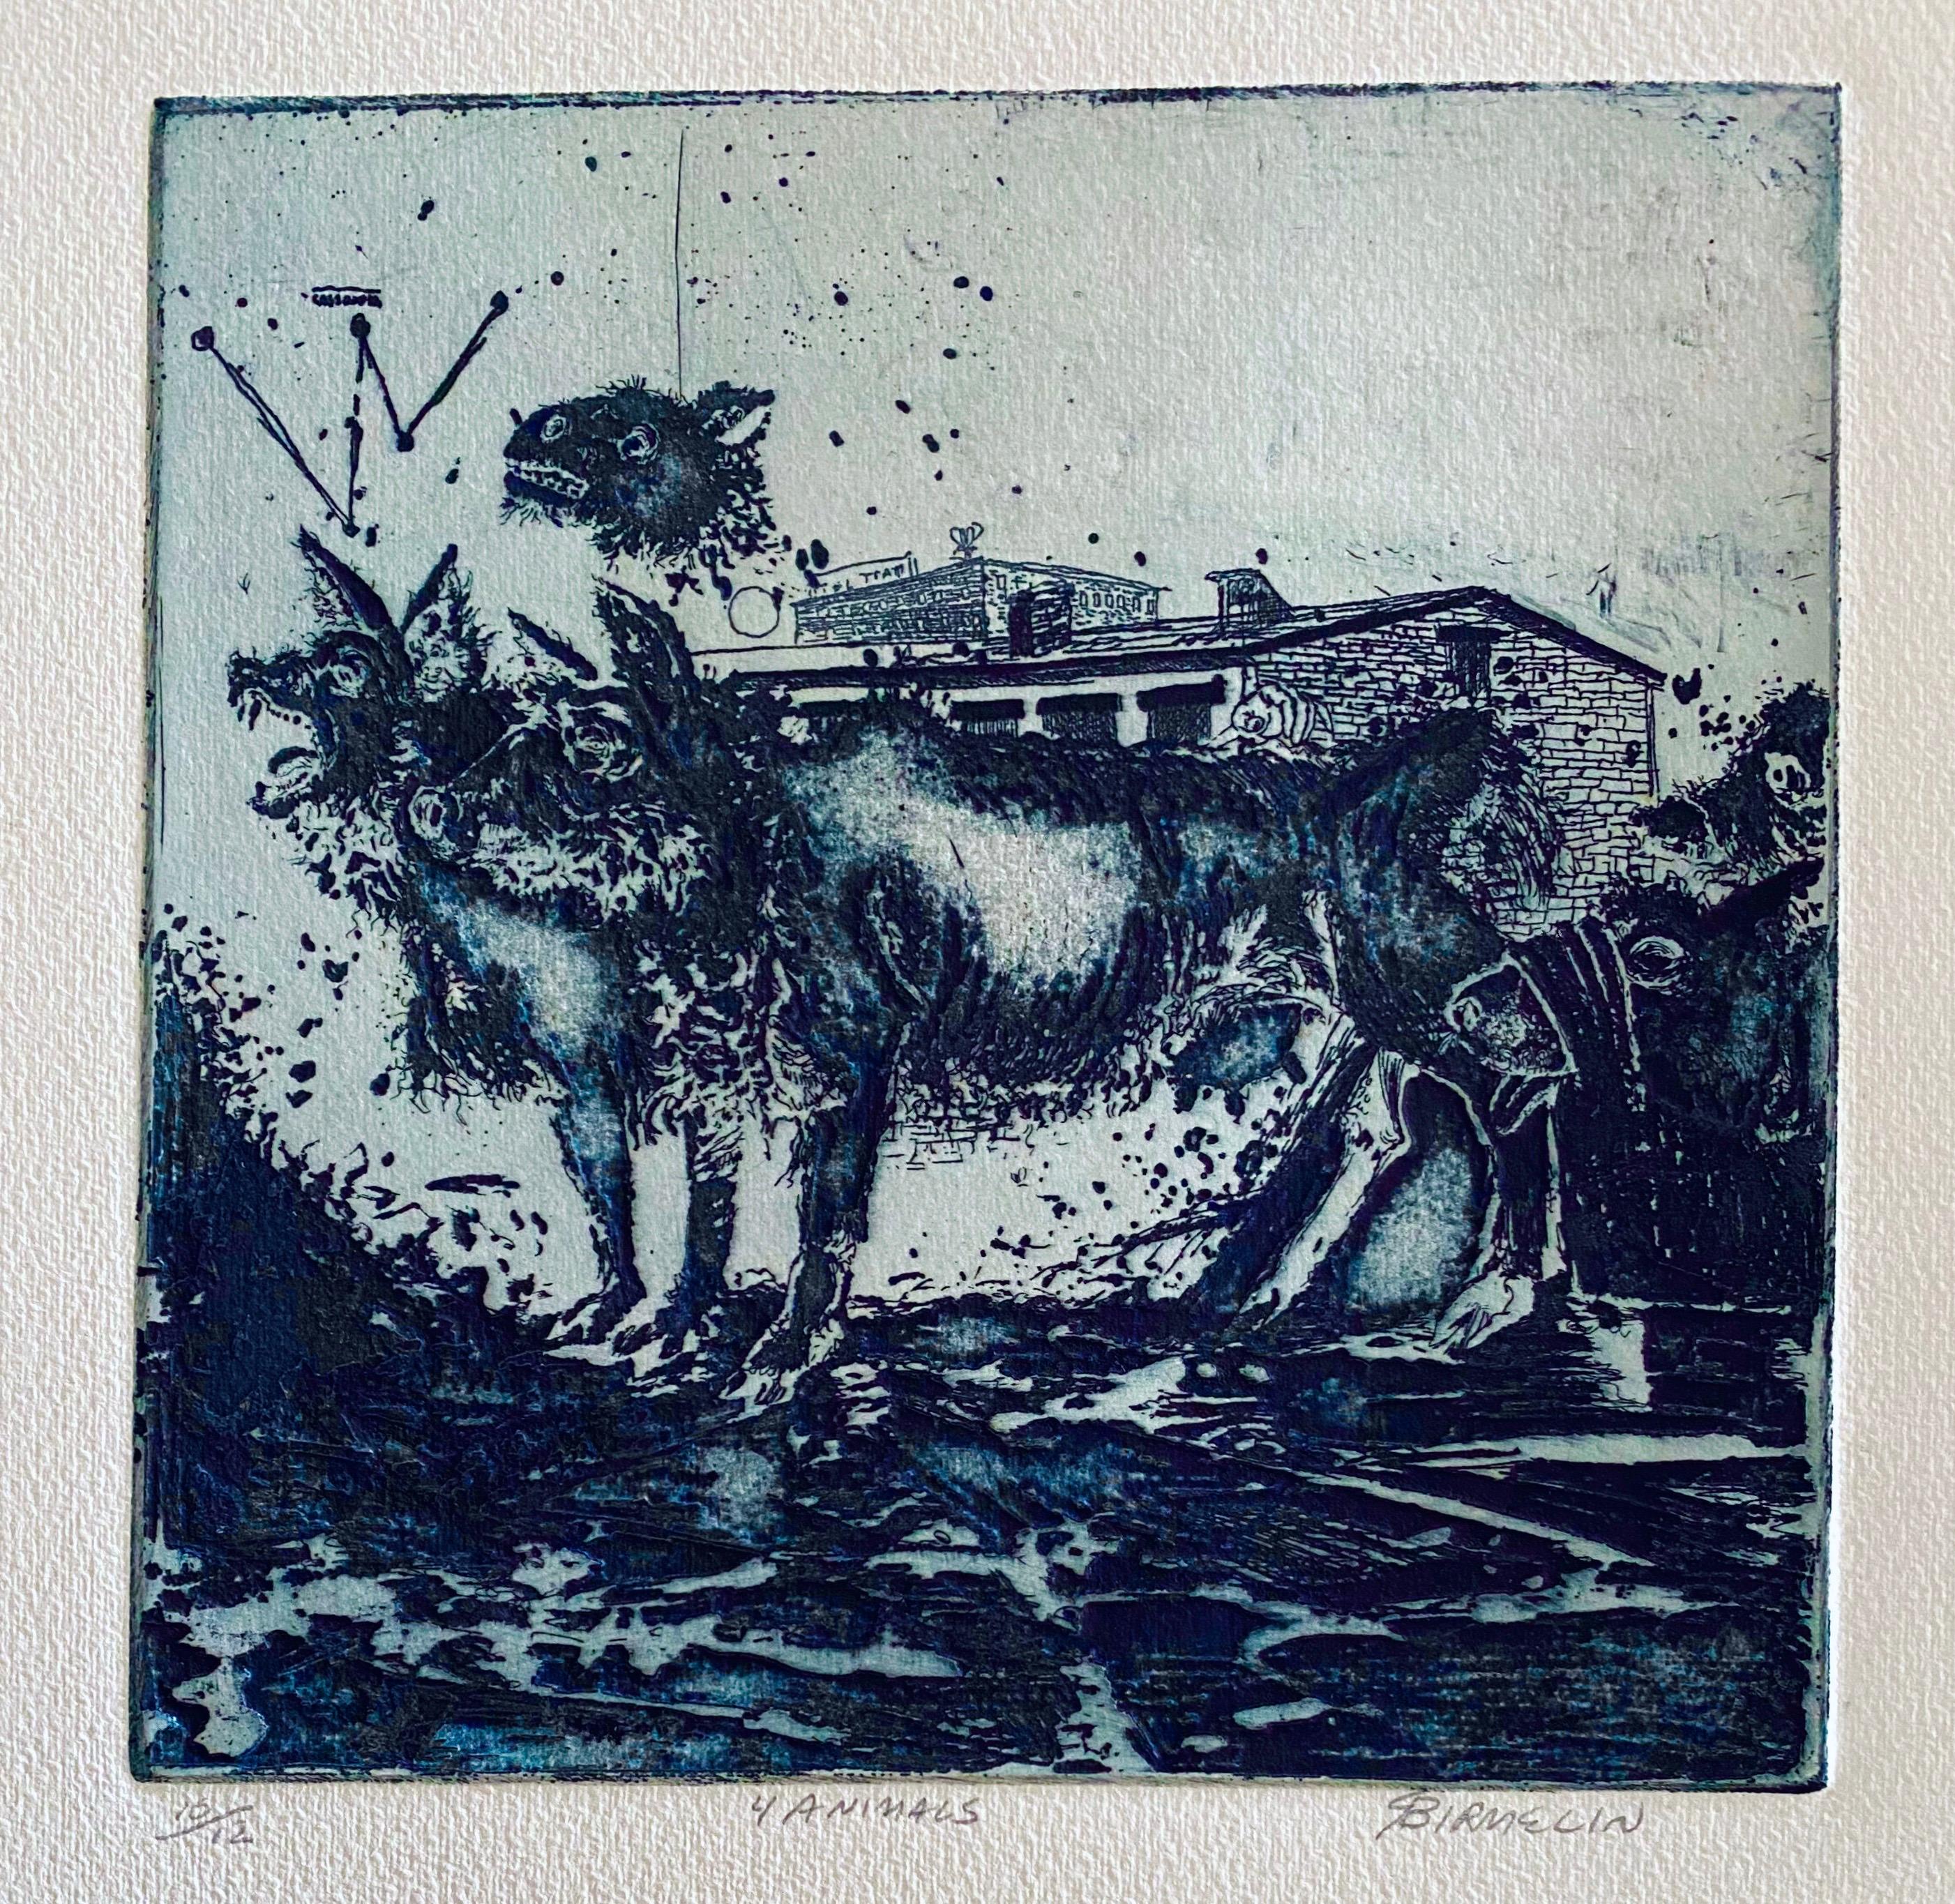 Robert A. Birmelin Abstract Print - 4 Animals, American Modernist Abstract Etching